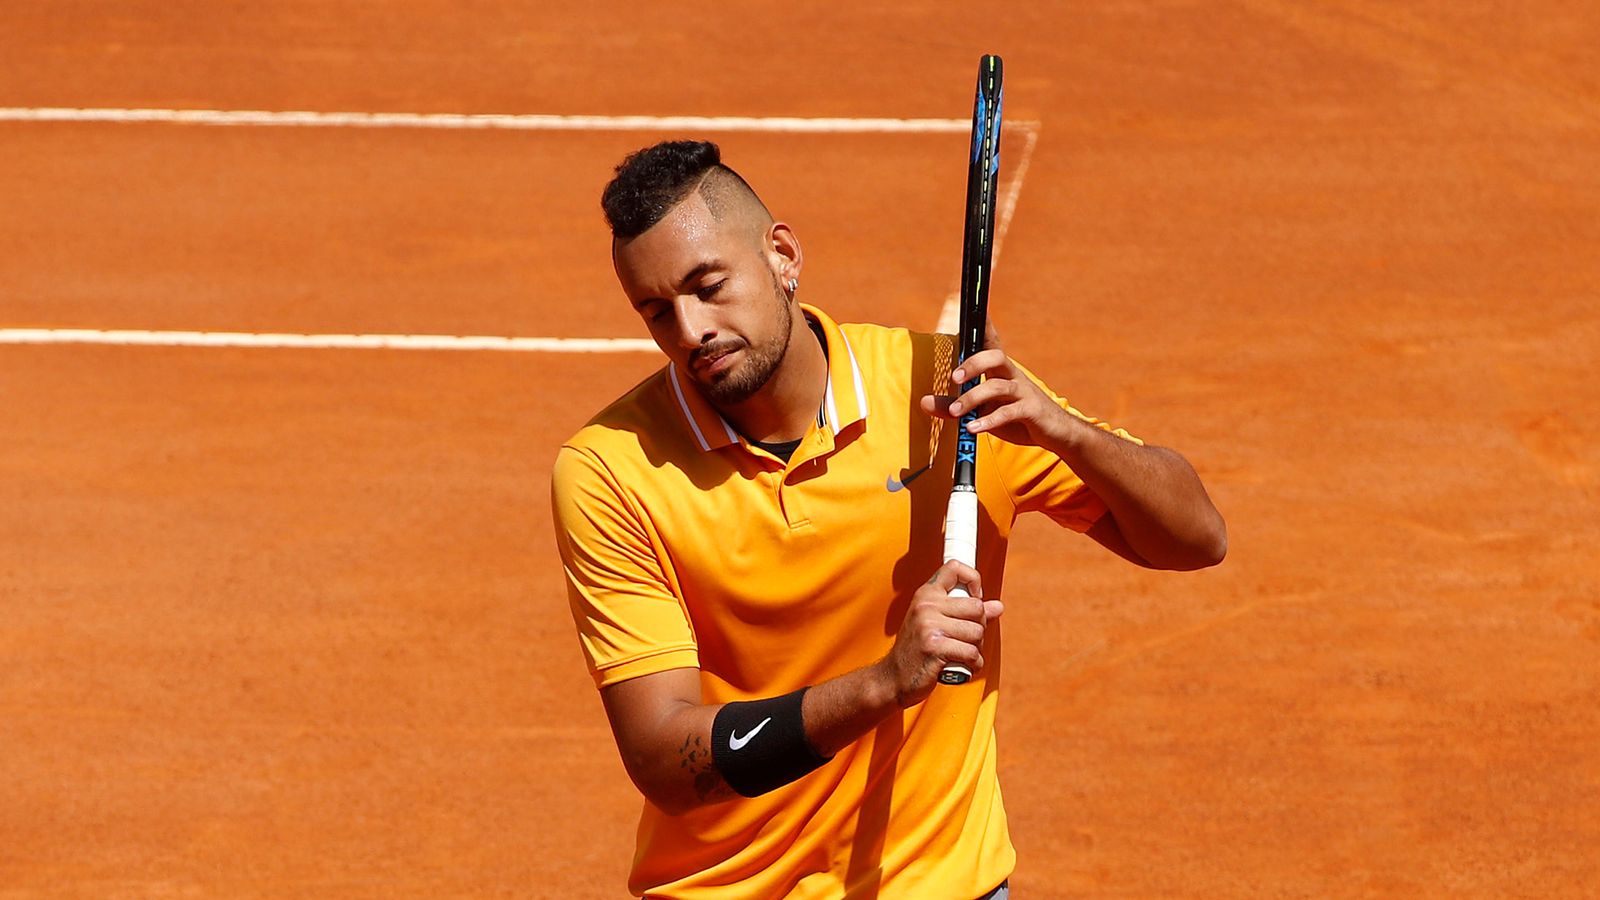 Nick Kyrgios withdraws from French Open | Tennis News | Sky Sports